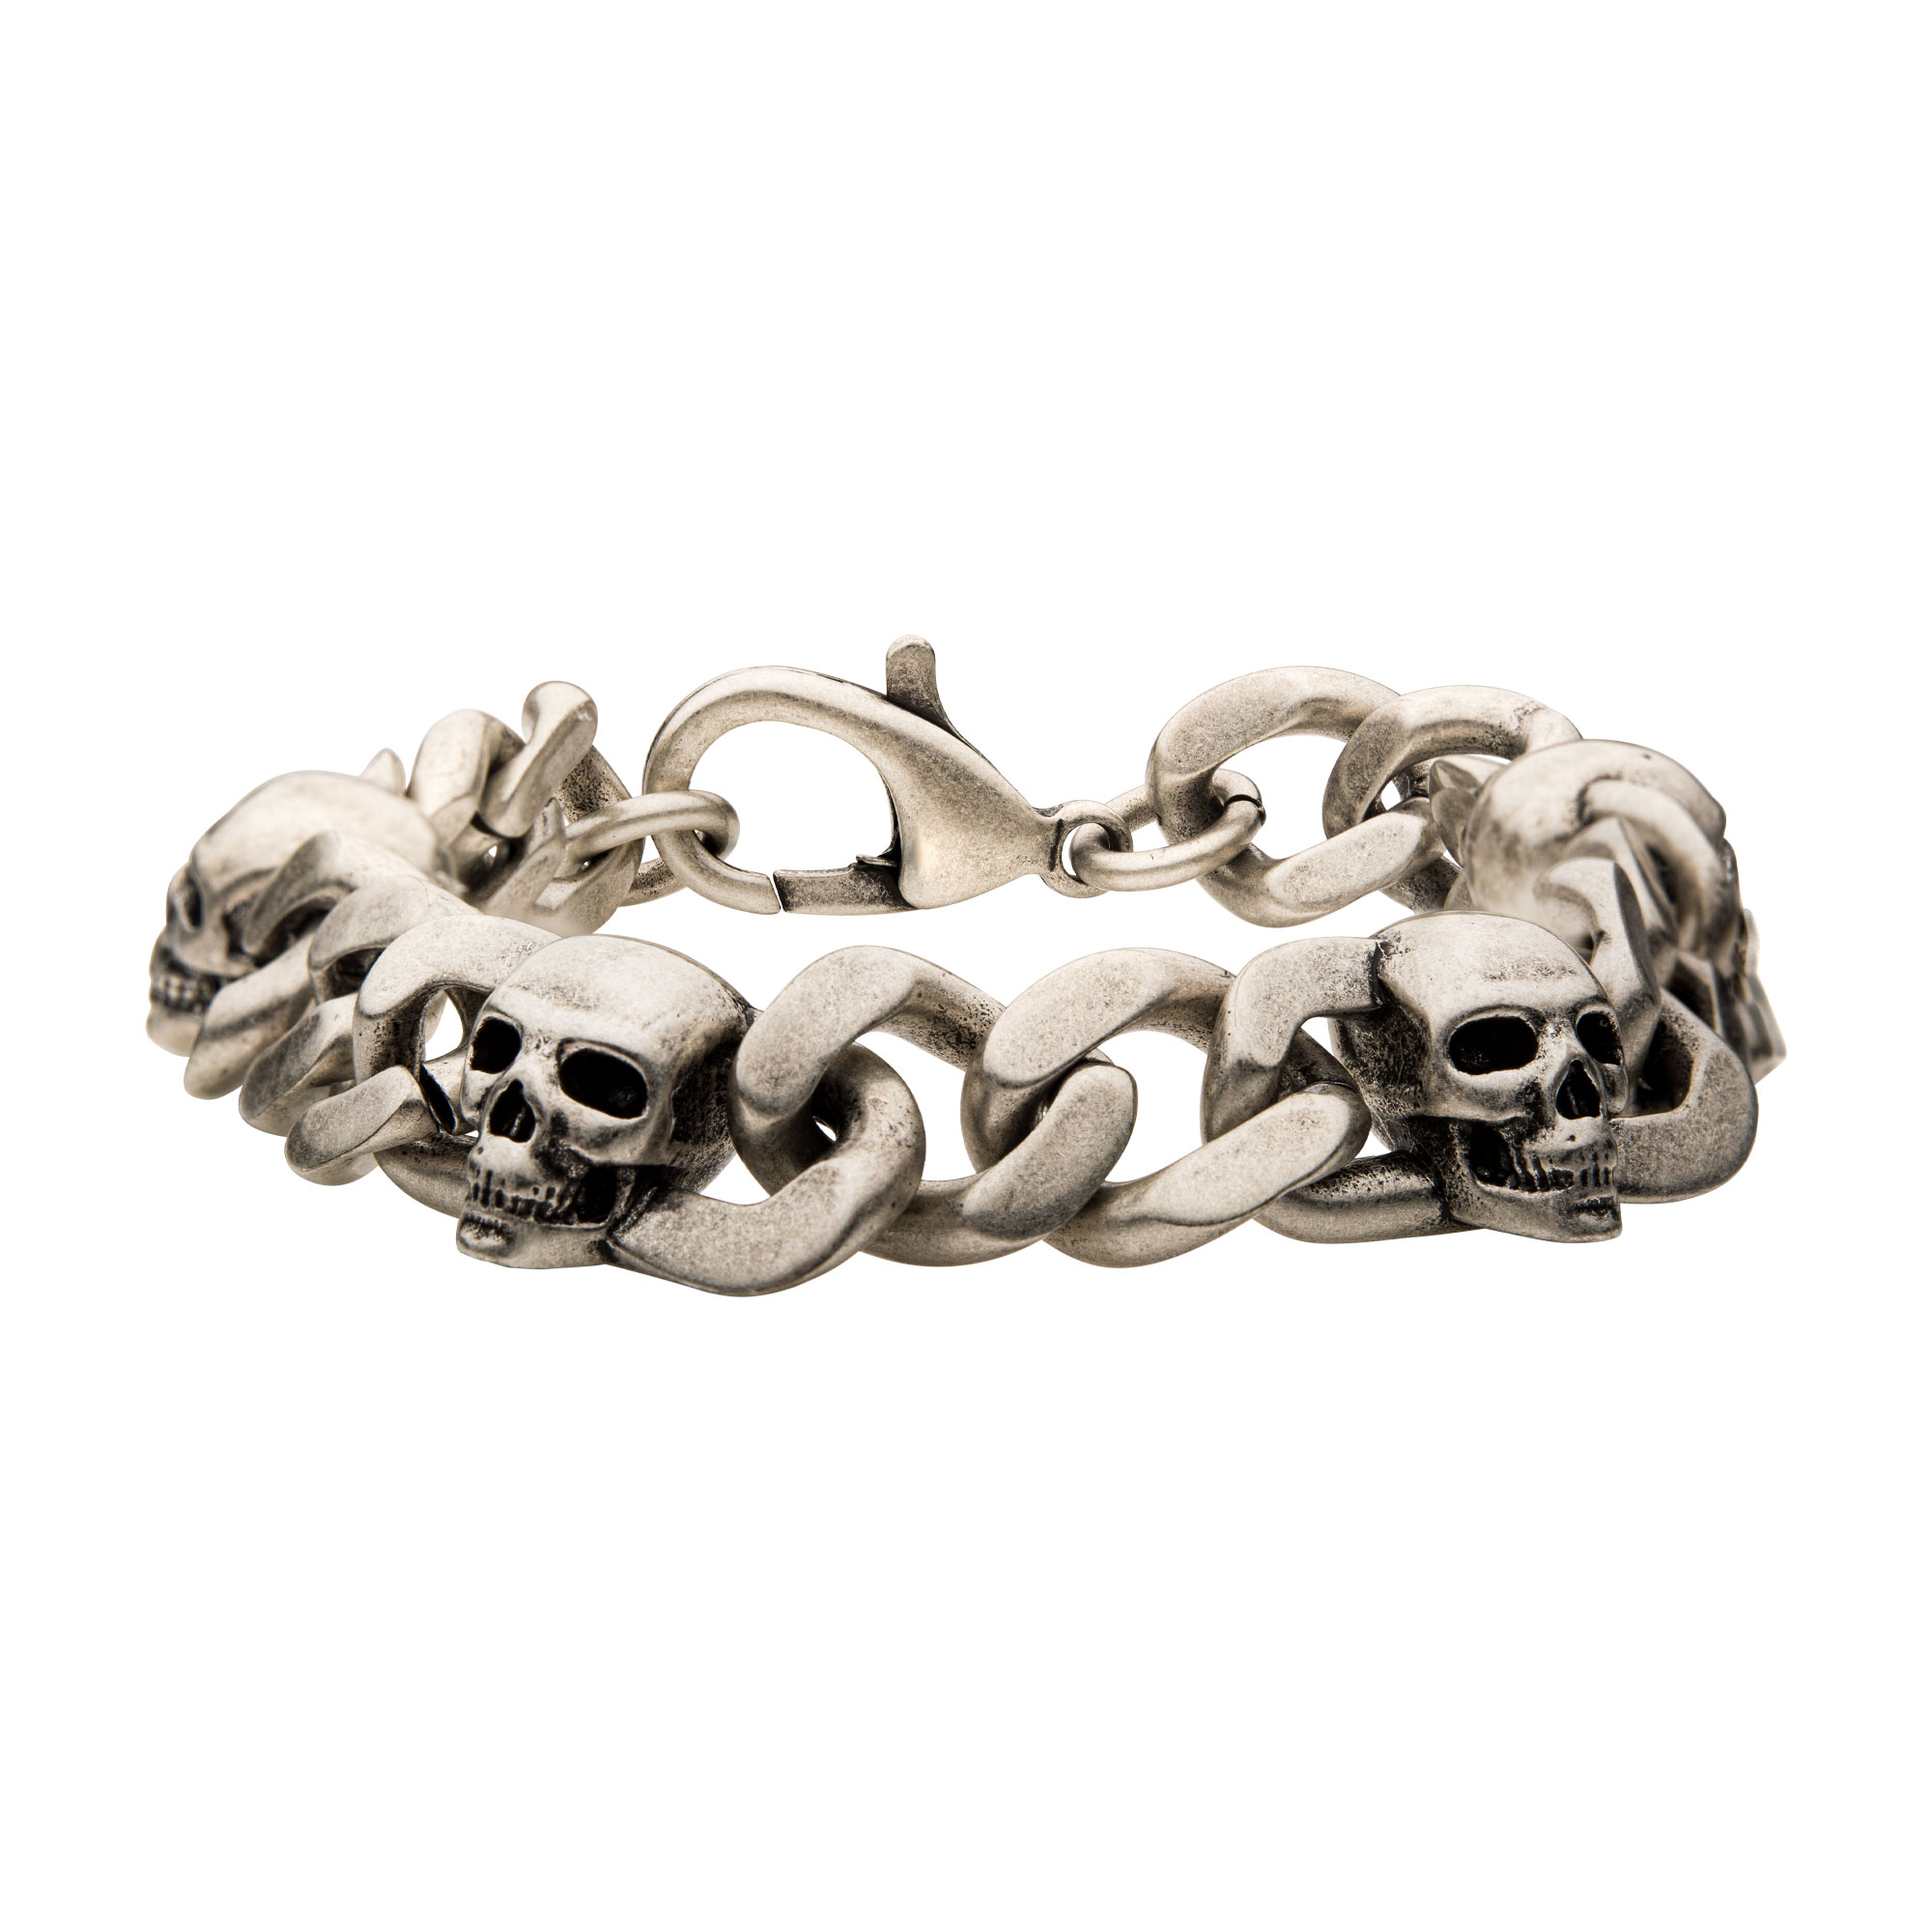 Stainless Steel Silver Plated with Skull Design Chunky Chain Bracelet Lewis Jewelers, Inc. Ansonia, CT